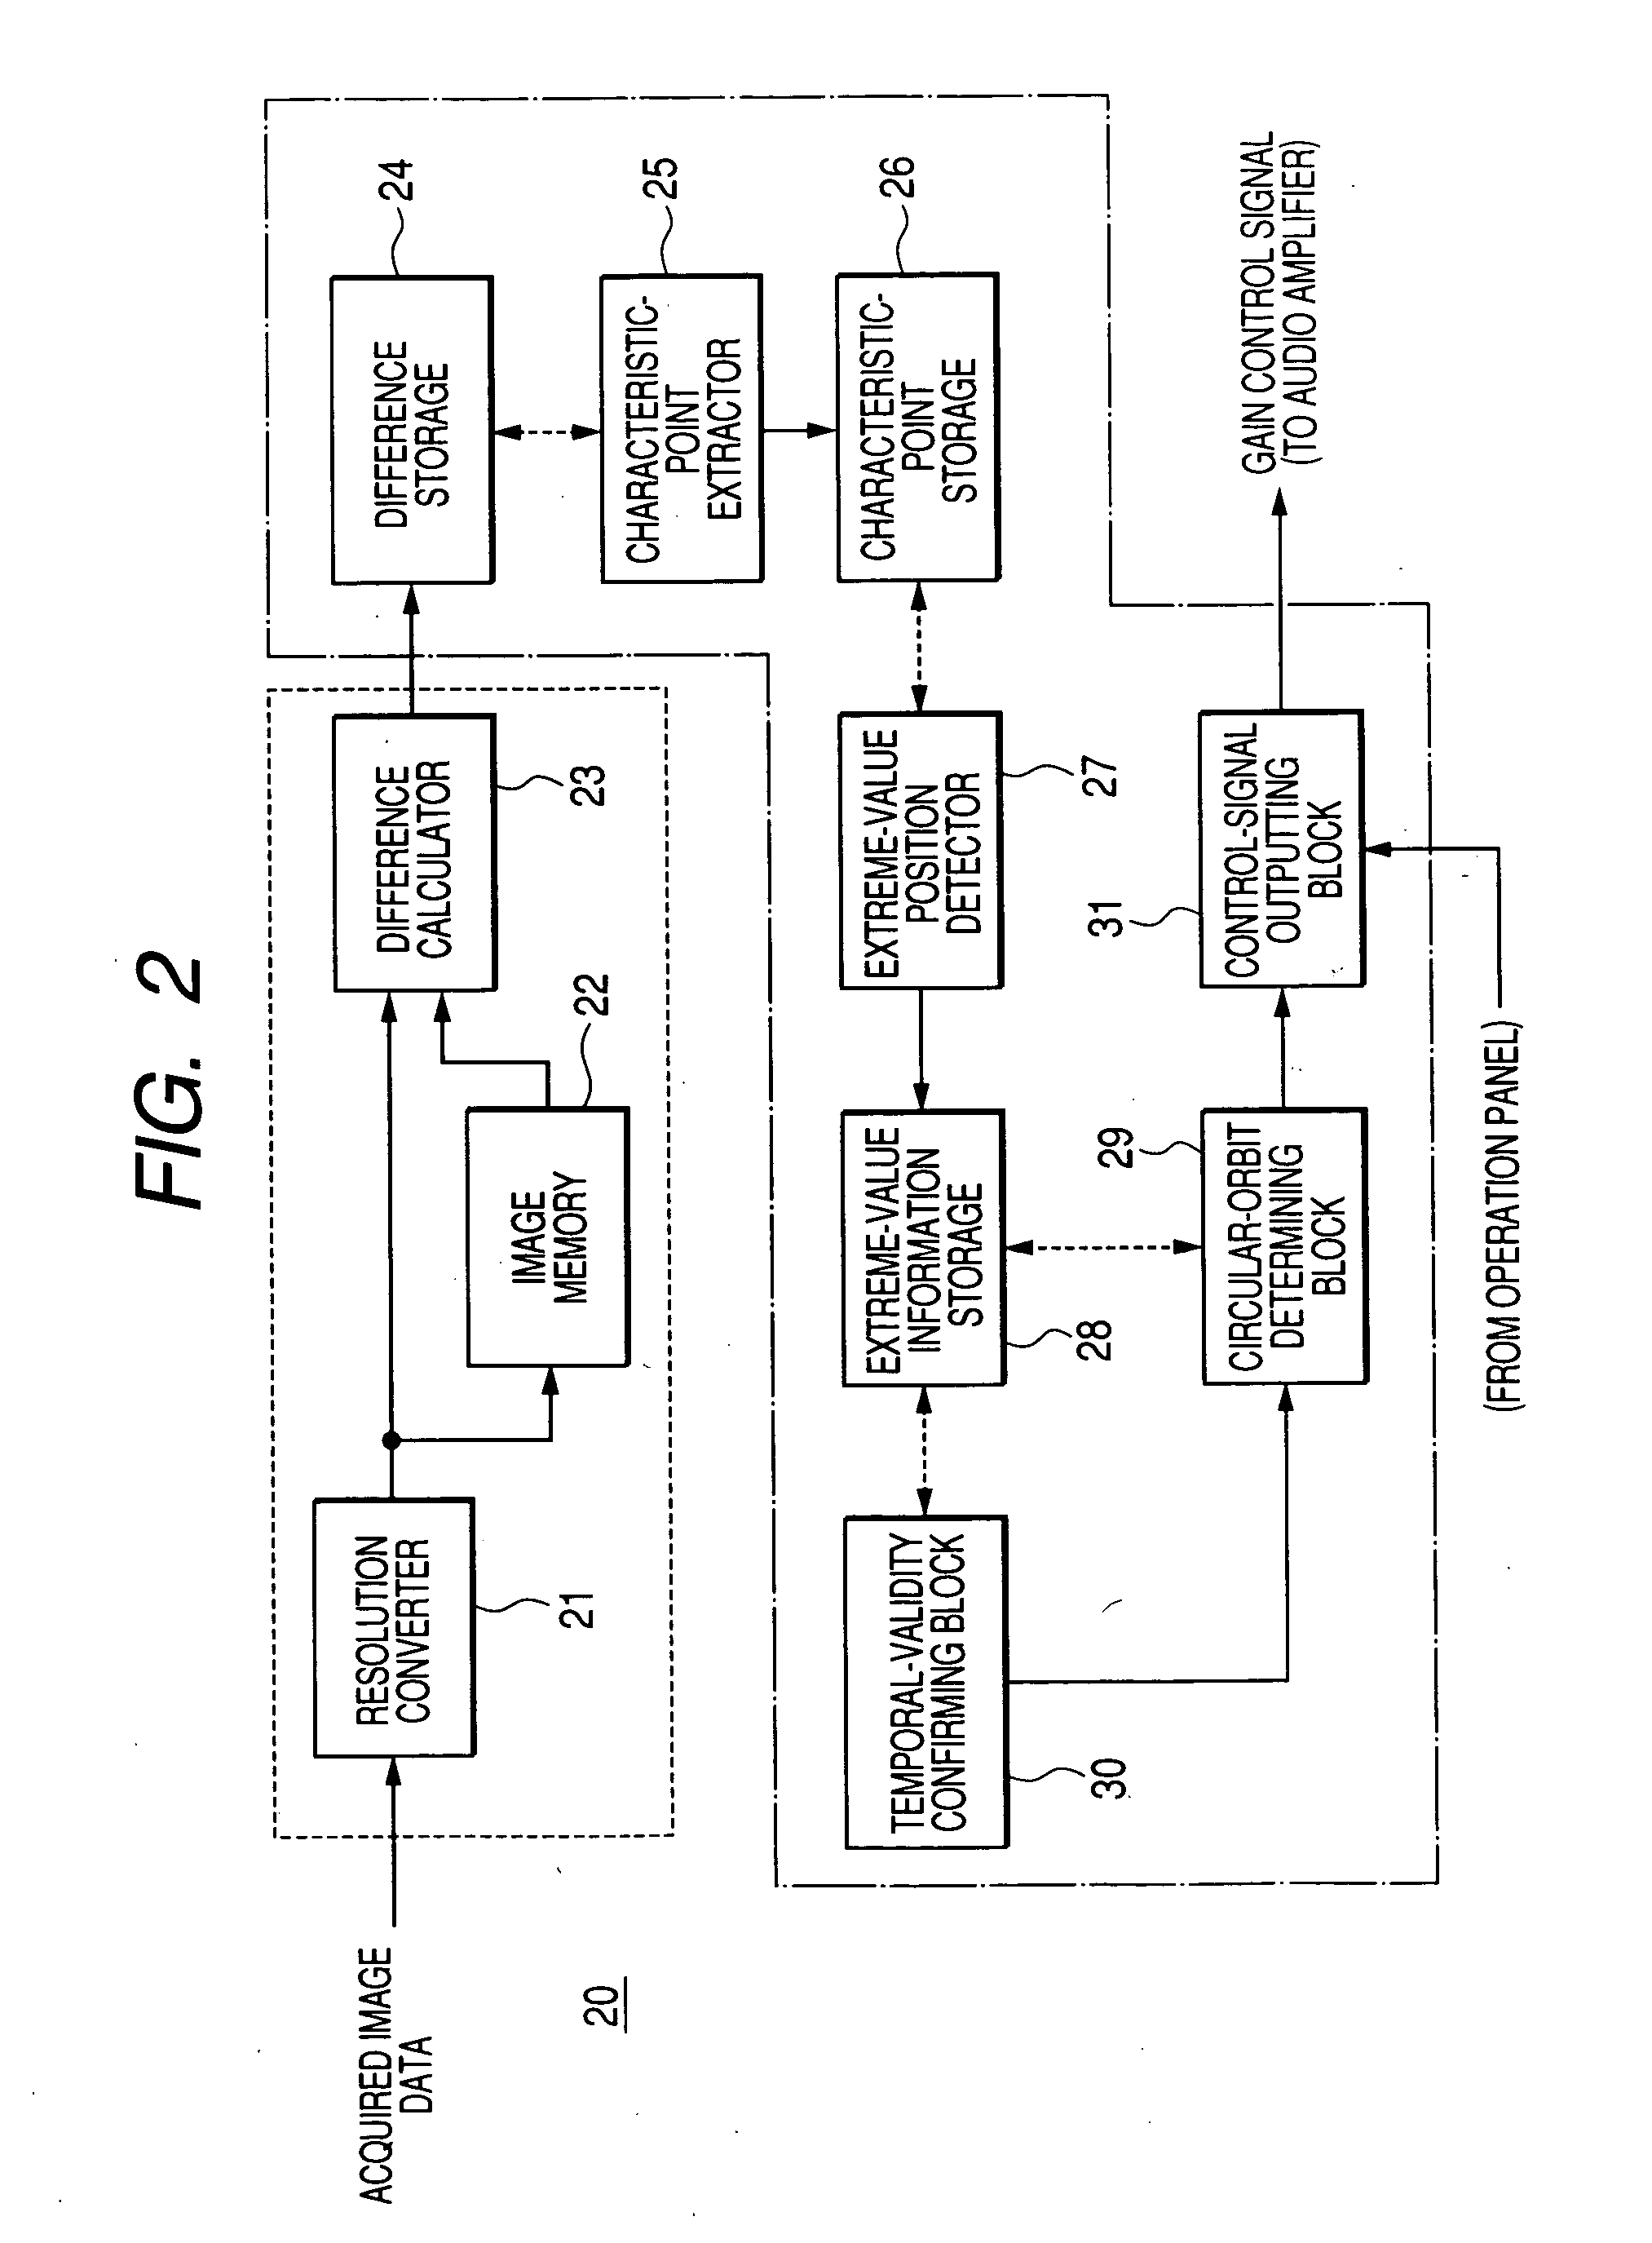 Method and apparatus for entering desired operational information to devices with the use of human motions